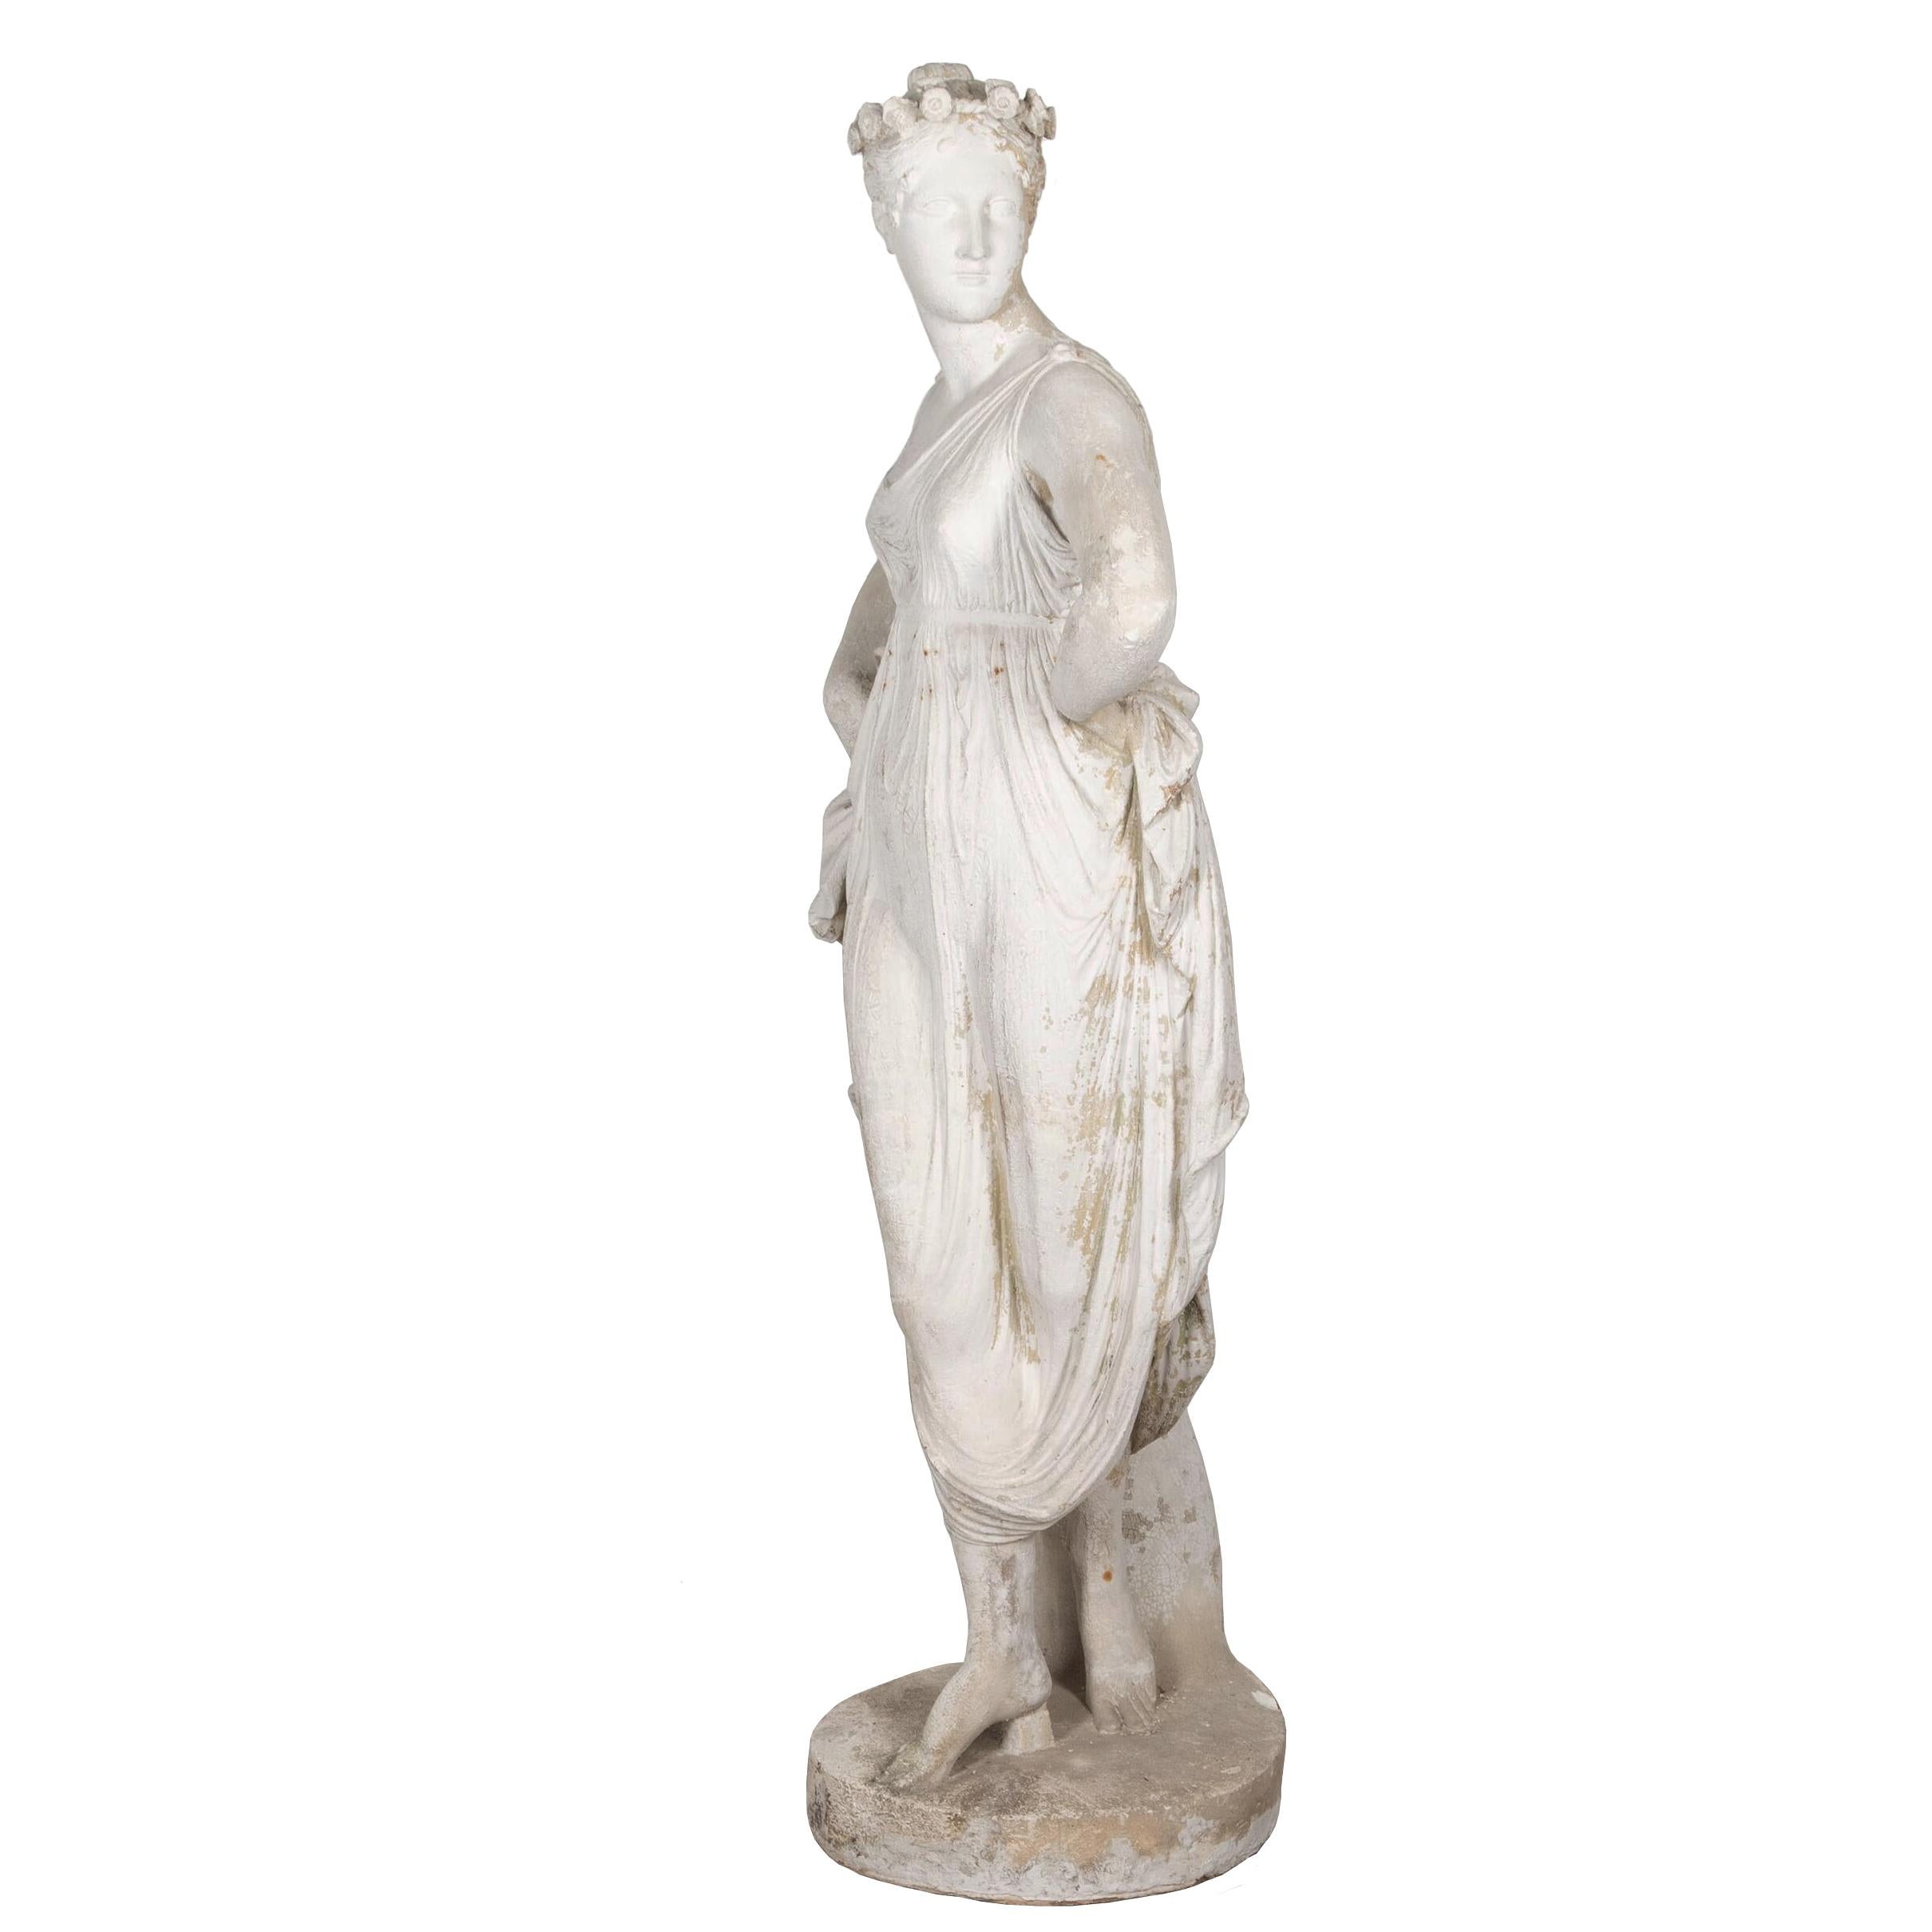 This wonderfully patinated life-size plaster statue is after the Italian sculptor Antonio Canova (1757-1822), 